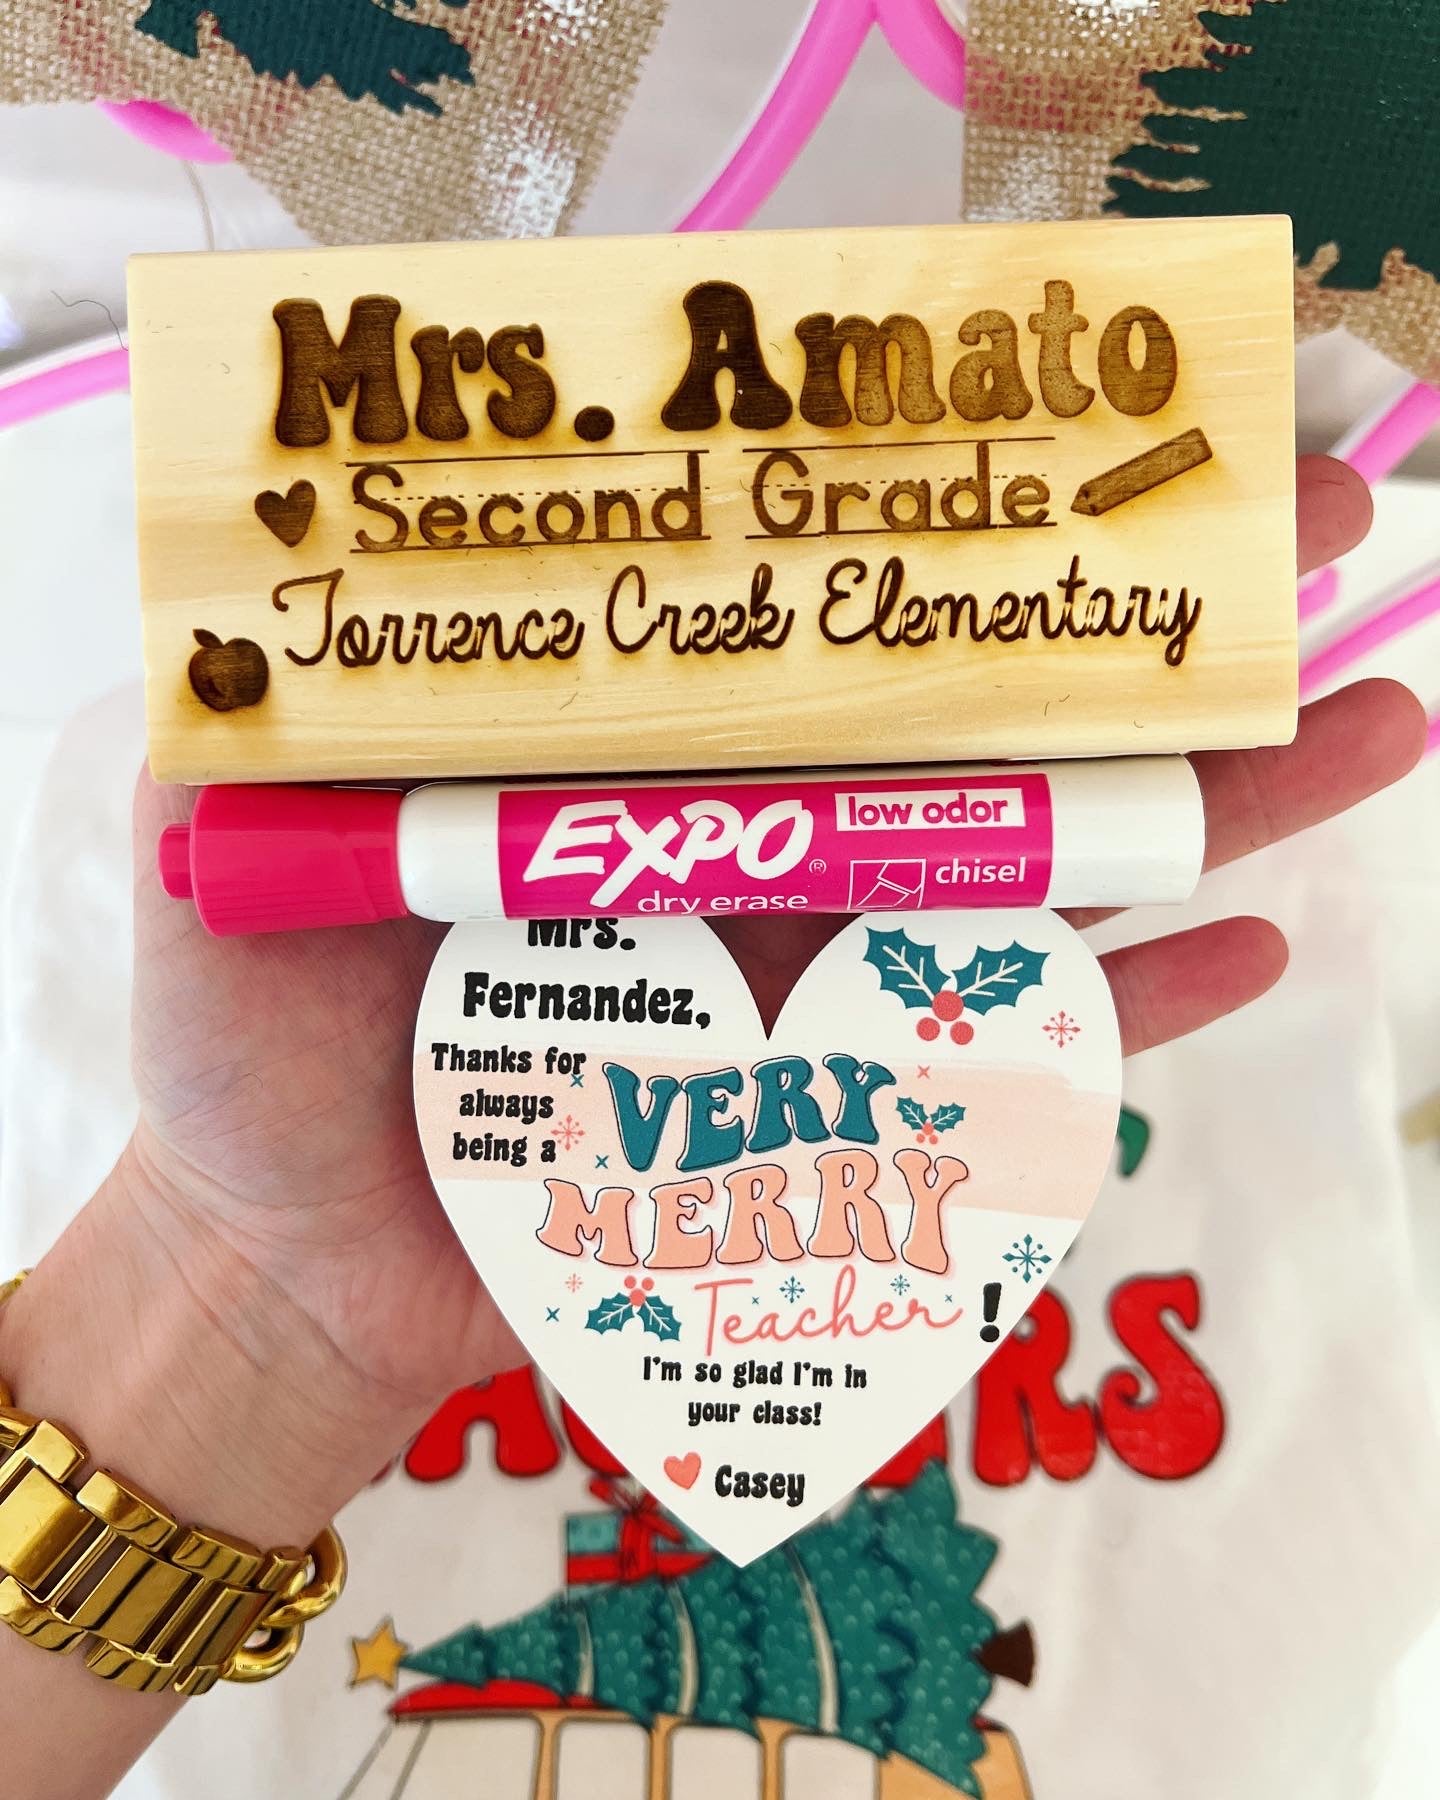 Personalized Engraved Whiteboard Eraser gift w/ Expo Marker, Personalized Christmas Card, Holographic cellophane gift bag tied with ribbon!